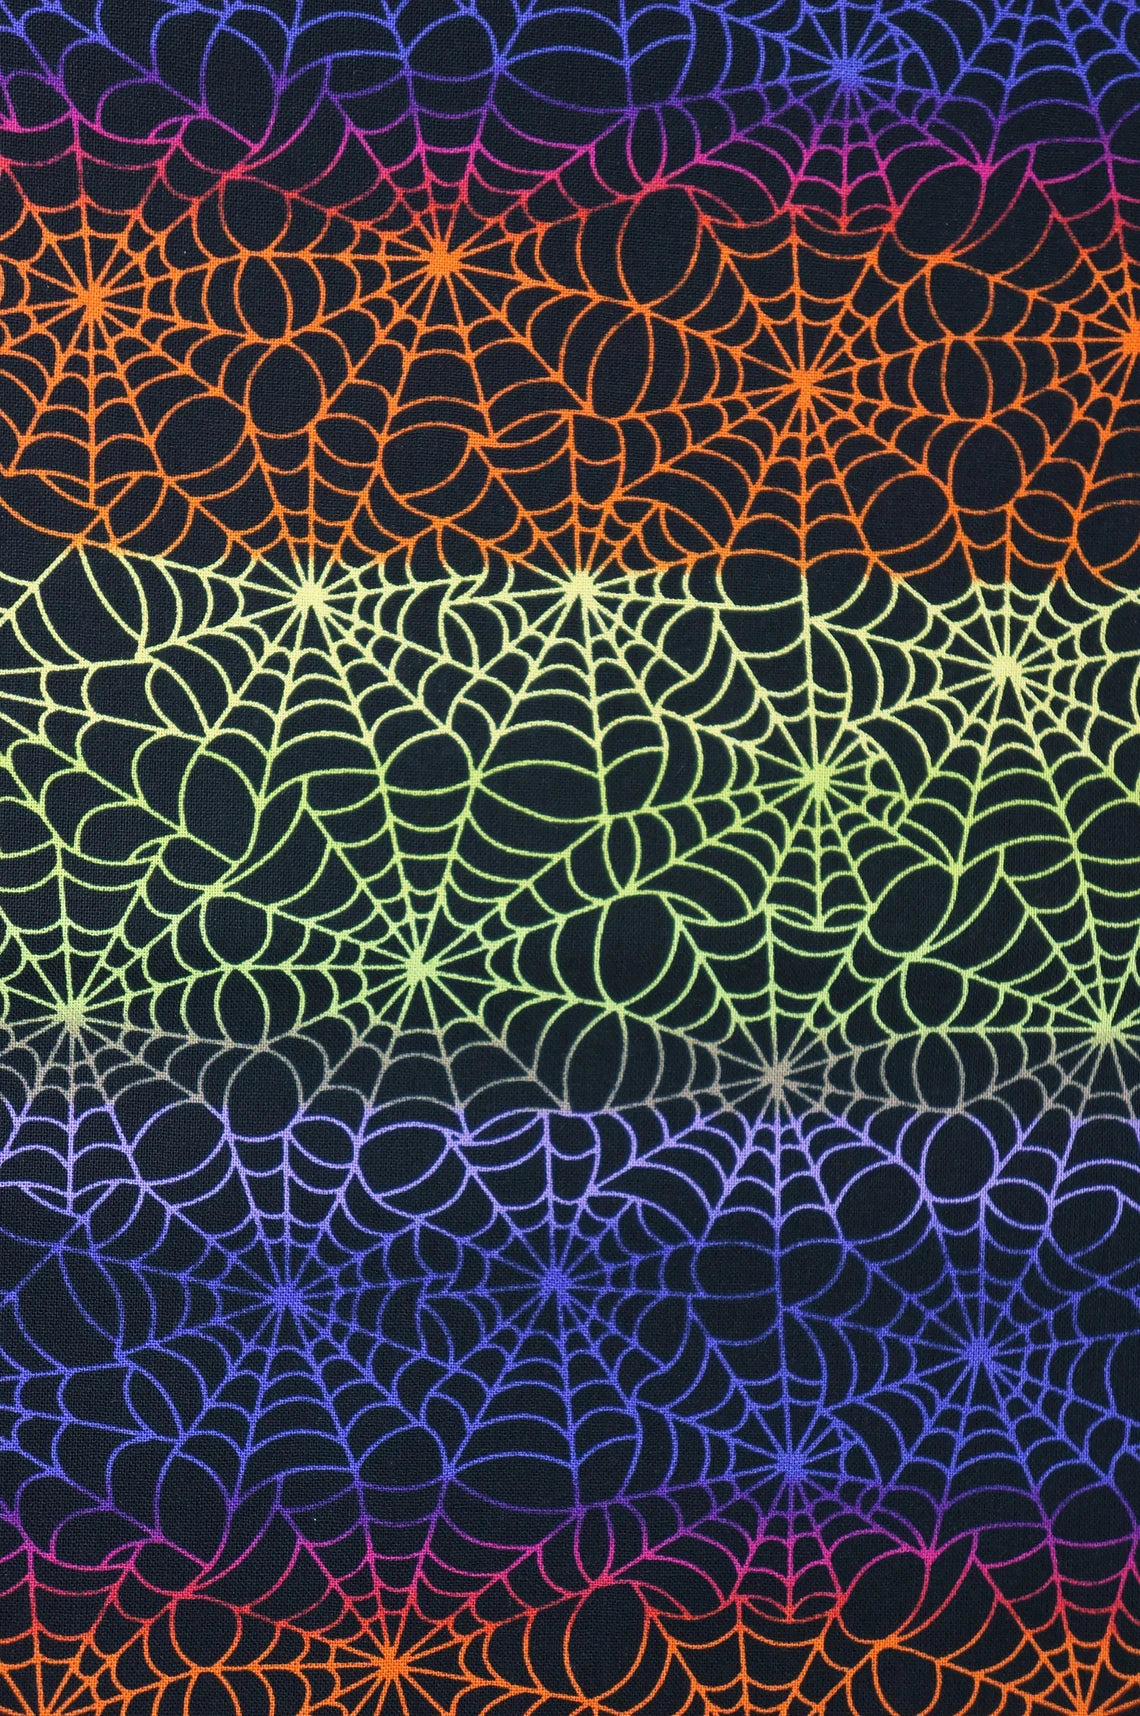 Multi-Colored Spider Webs-David Textiles-BTY-Halloween